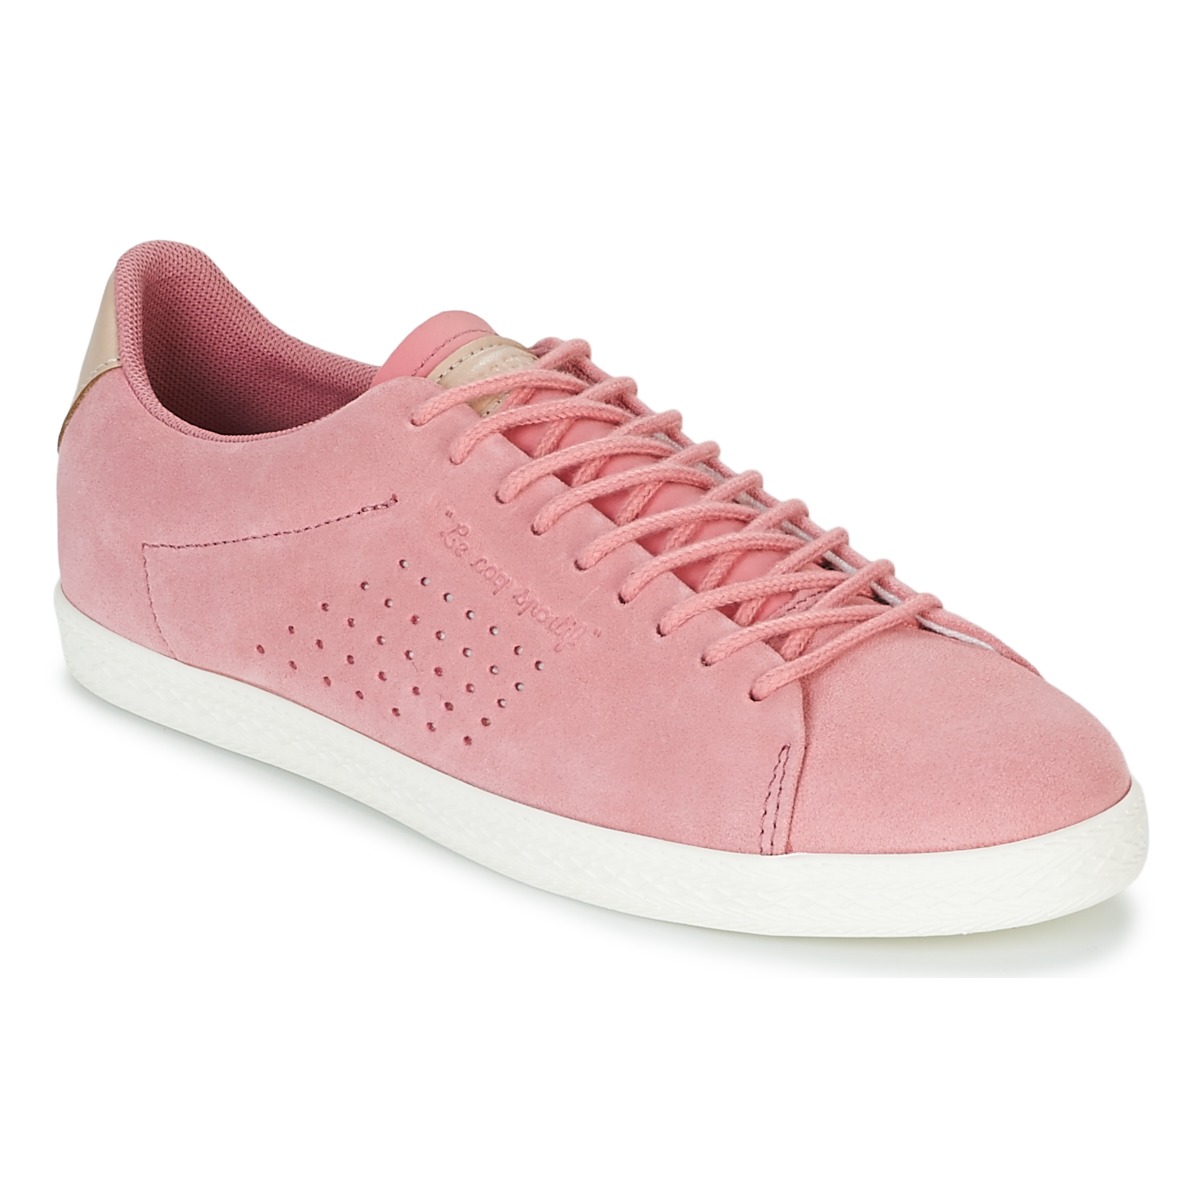 Chaussures Femme Baskets basses Le Coq Sportif CHARLINE SUEDE Rose